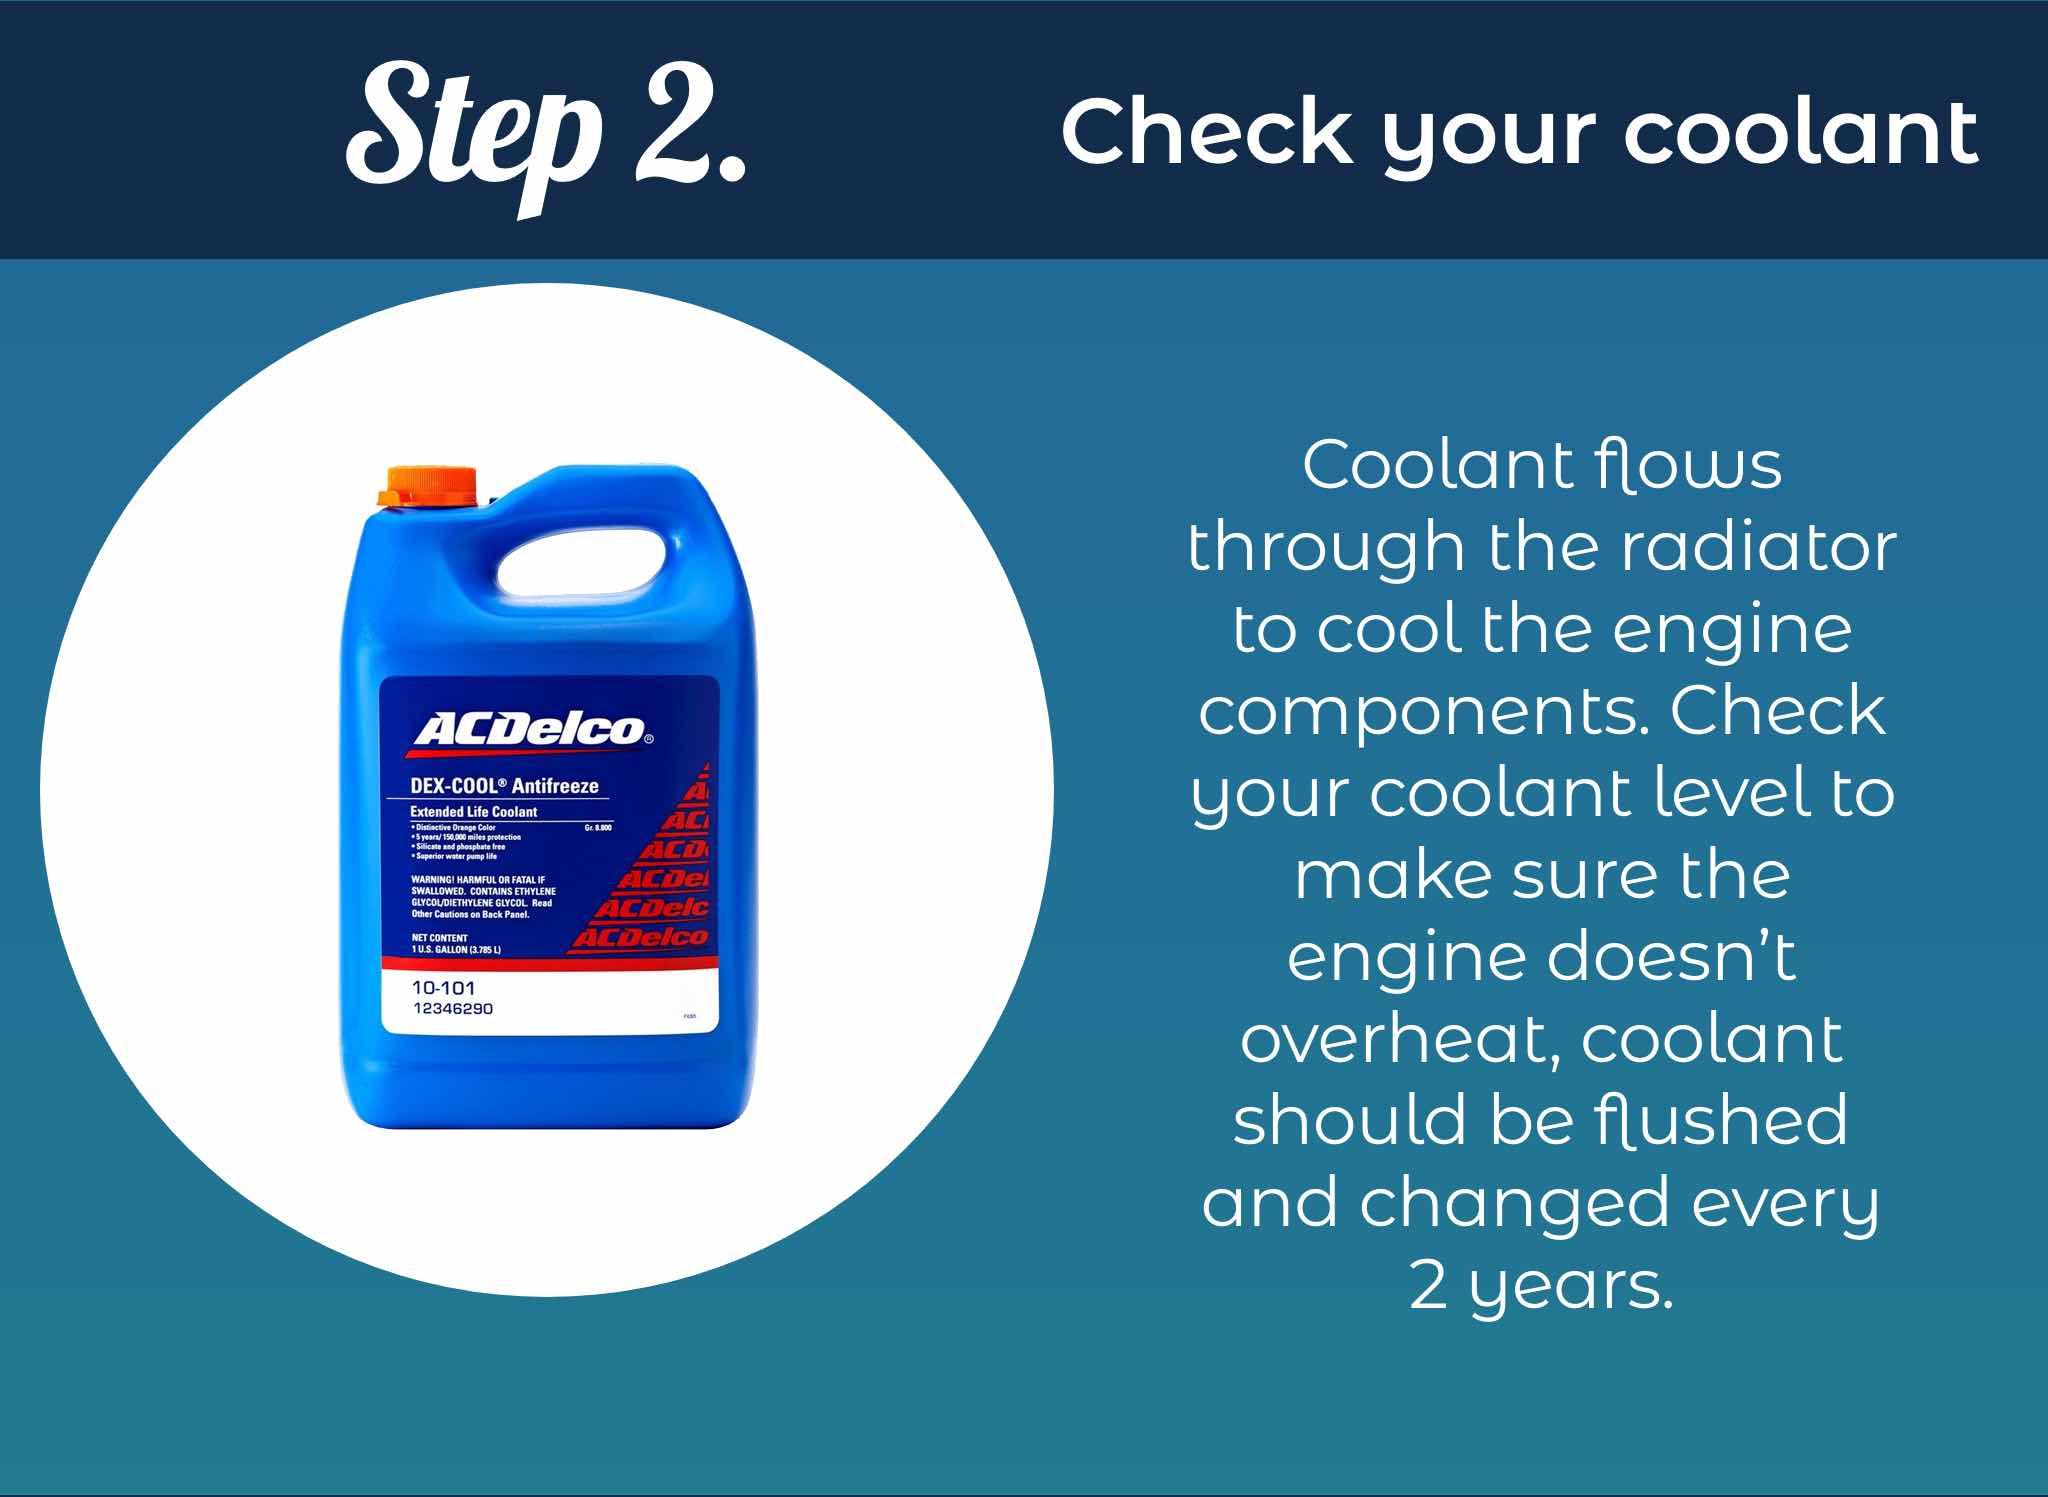 Coolant flows through the radiator to cool the engine components. Check your coolant level to make sure the engine doesn’t overheat, coolant should be flushed and changed every 2 years.